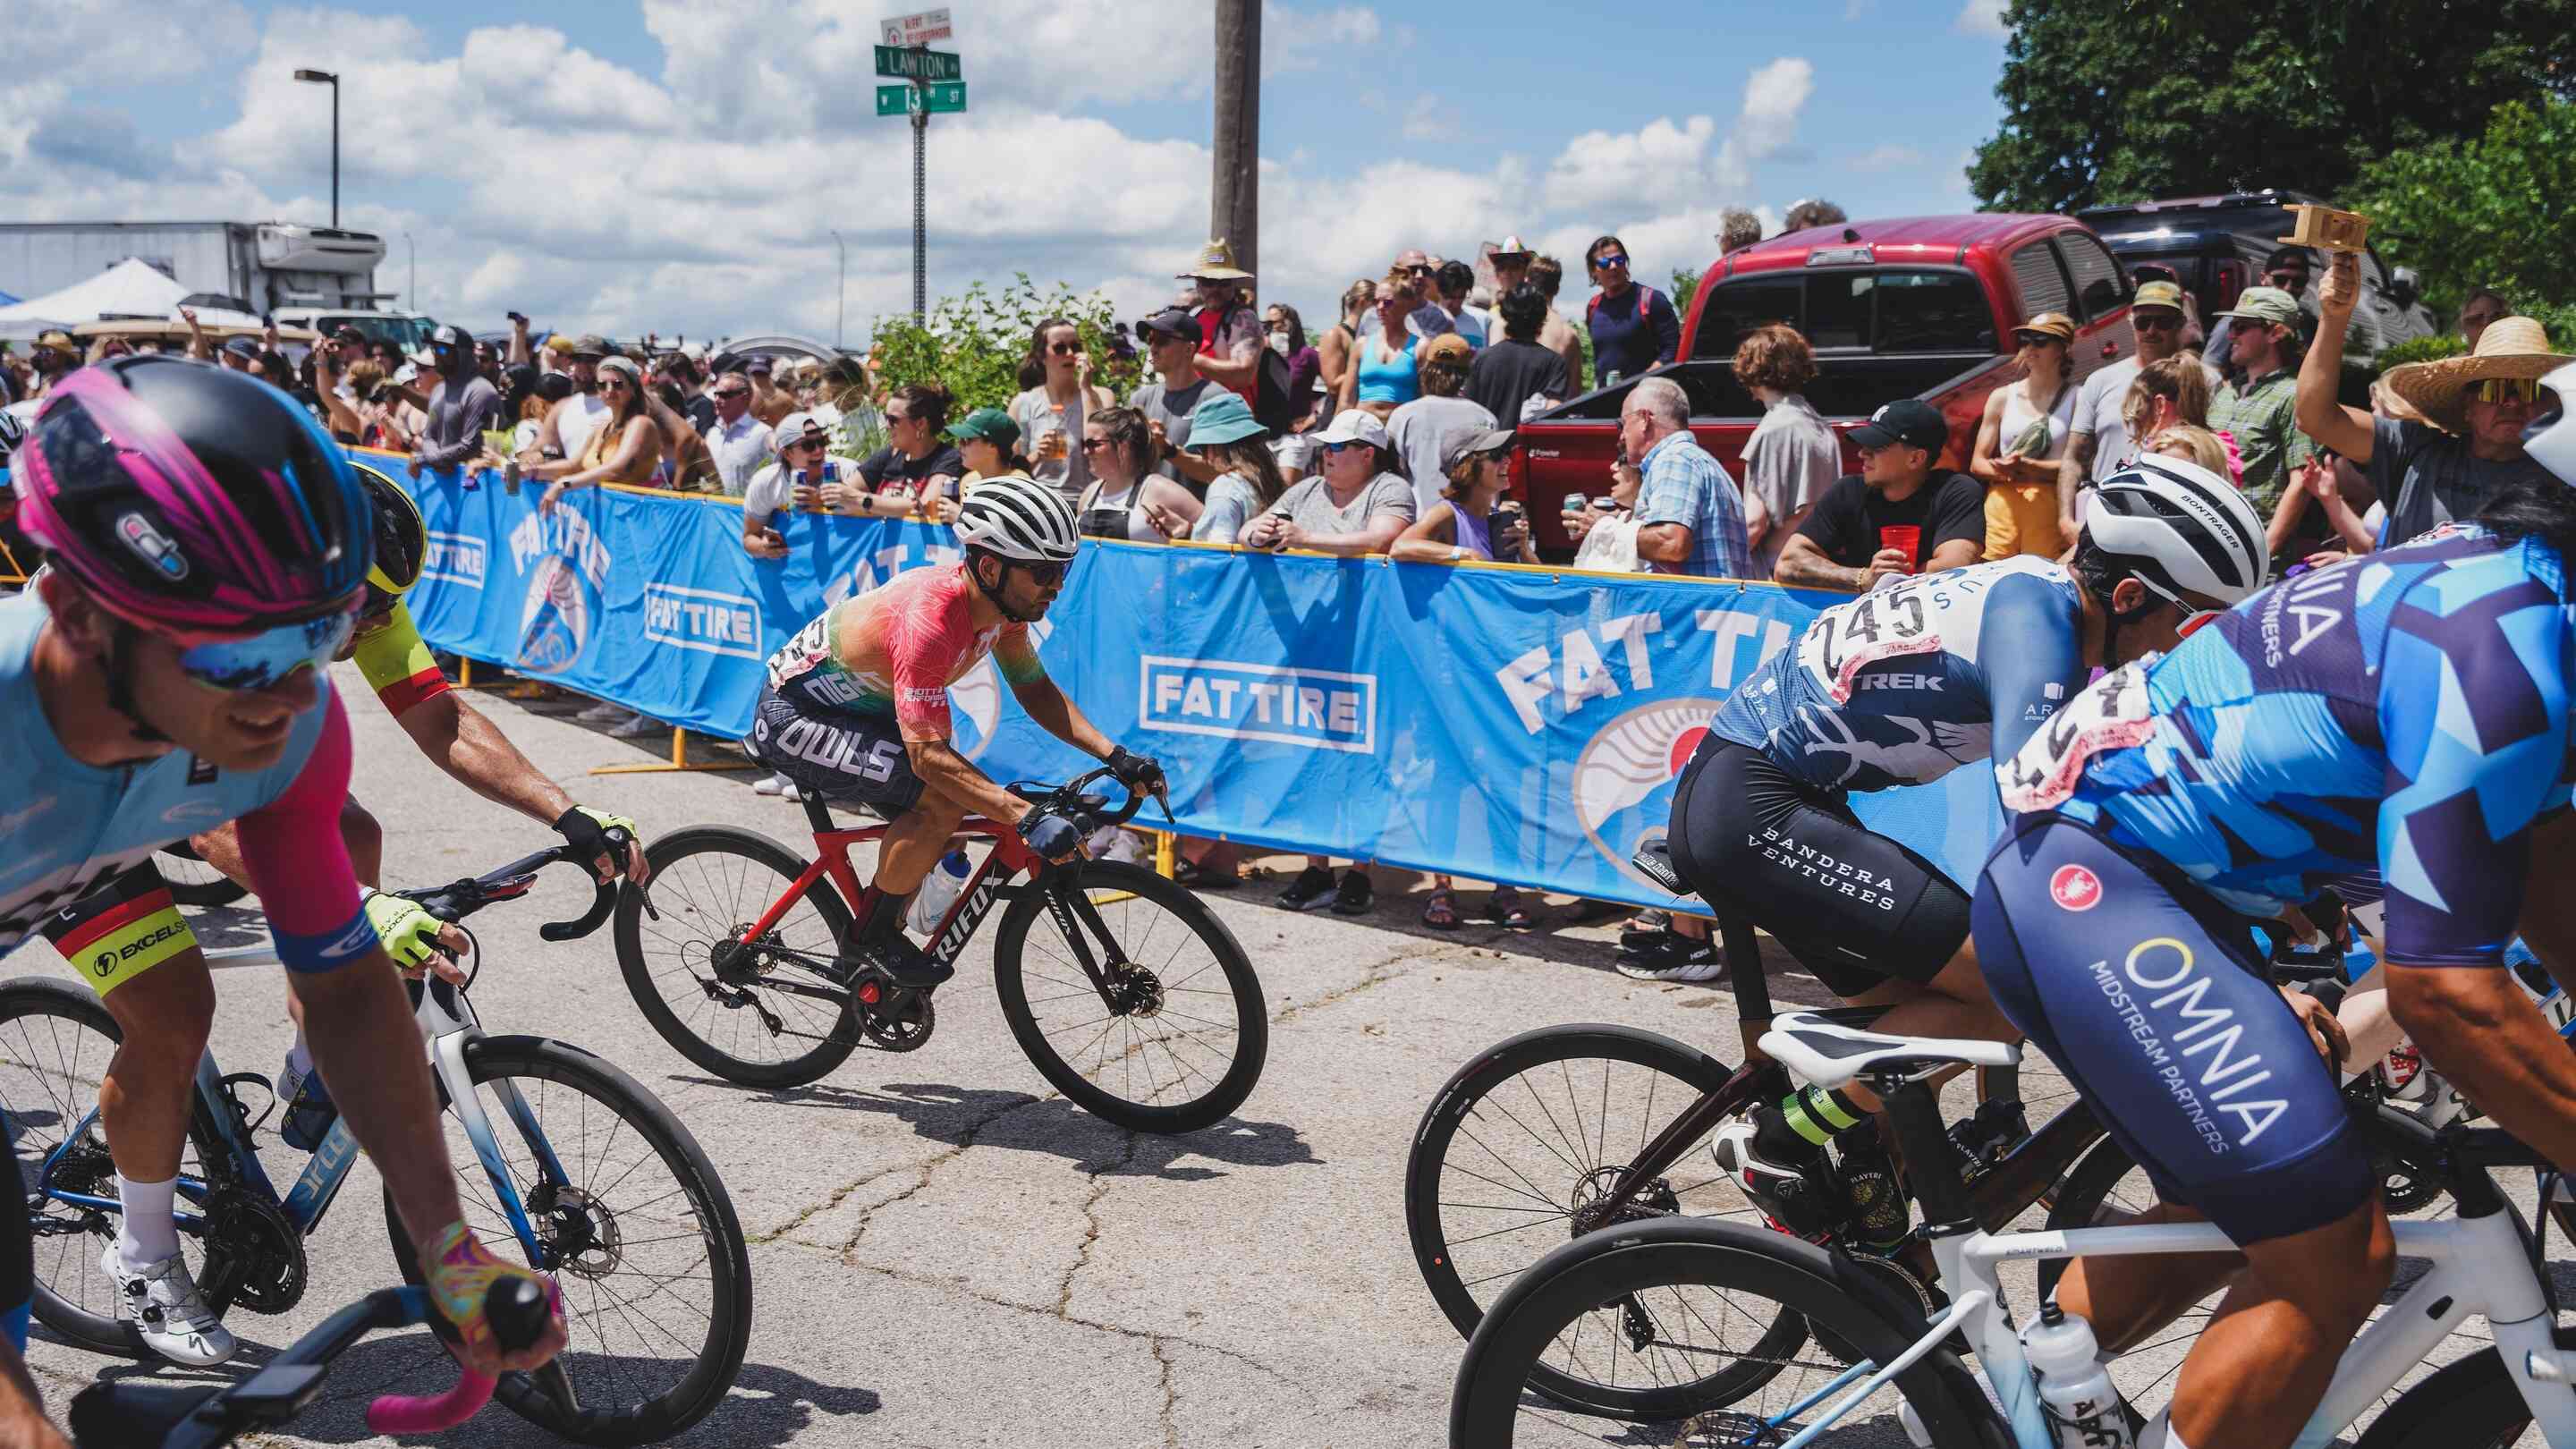 6 Tips for Getting Started in Bike Racing